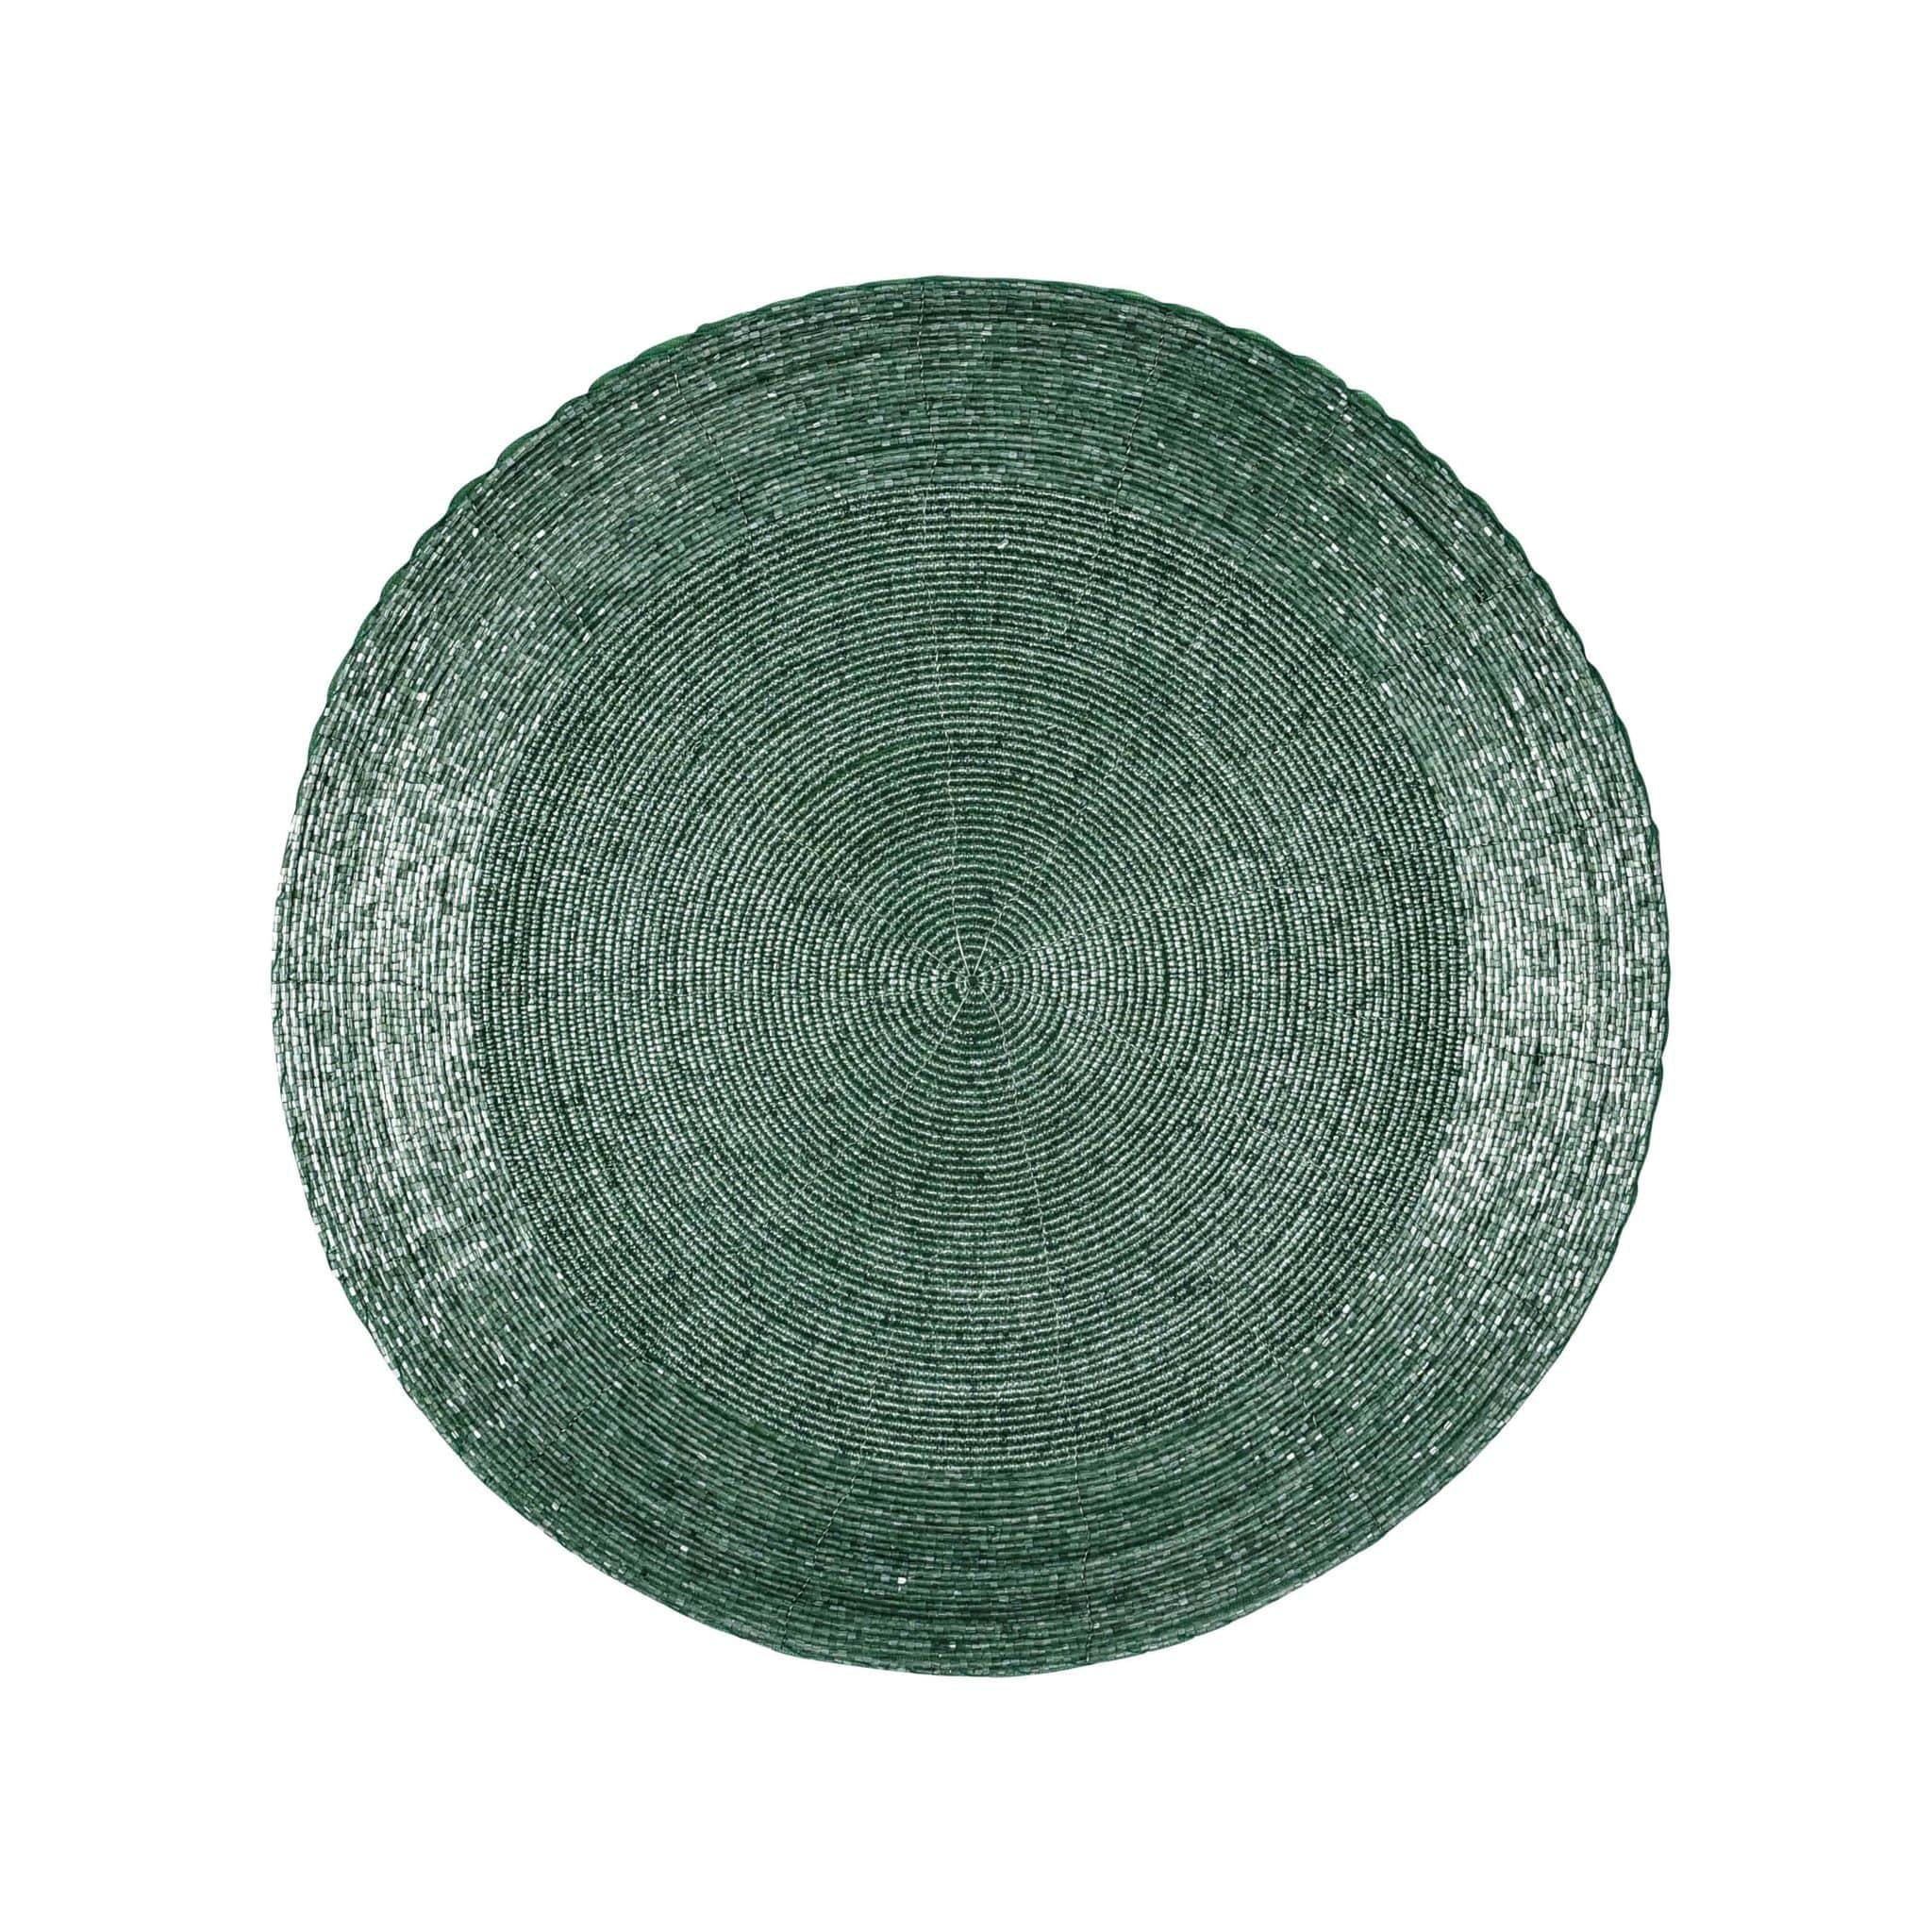 Glass Beaded Placemat <br>Color: Olive Green Two-Tone<br>Size: 13.5" Round<br>Set of 4 - Trunkin' USA